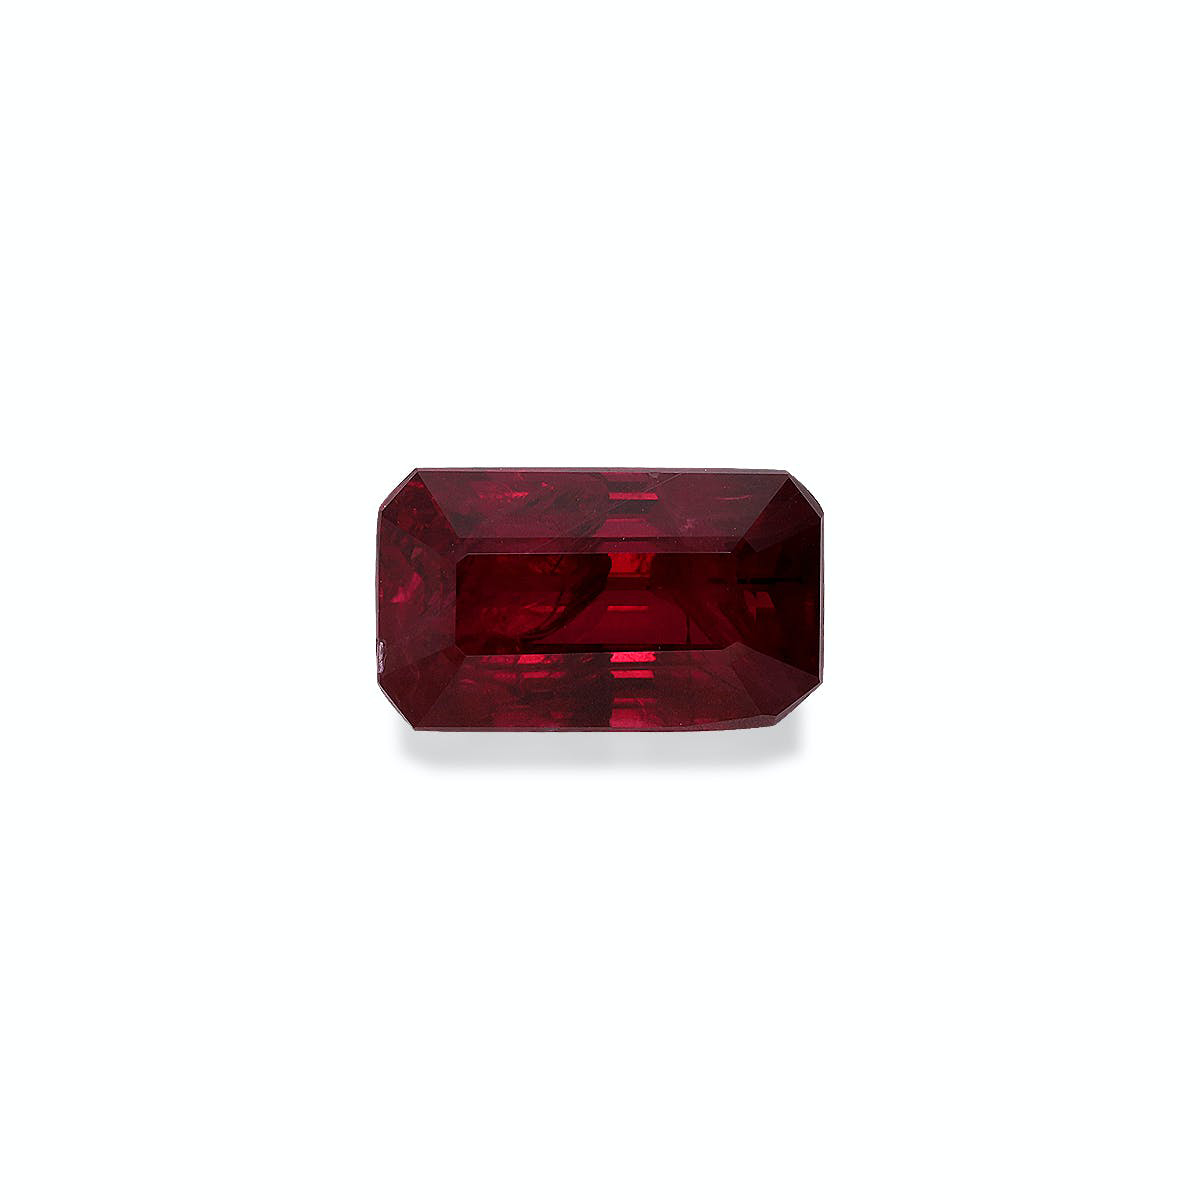 Picture of Unheated Mozambique Ruby 5.04ct (J1-98)